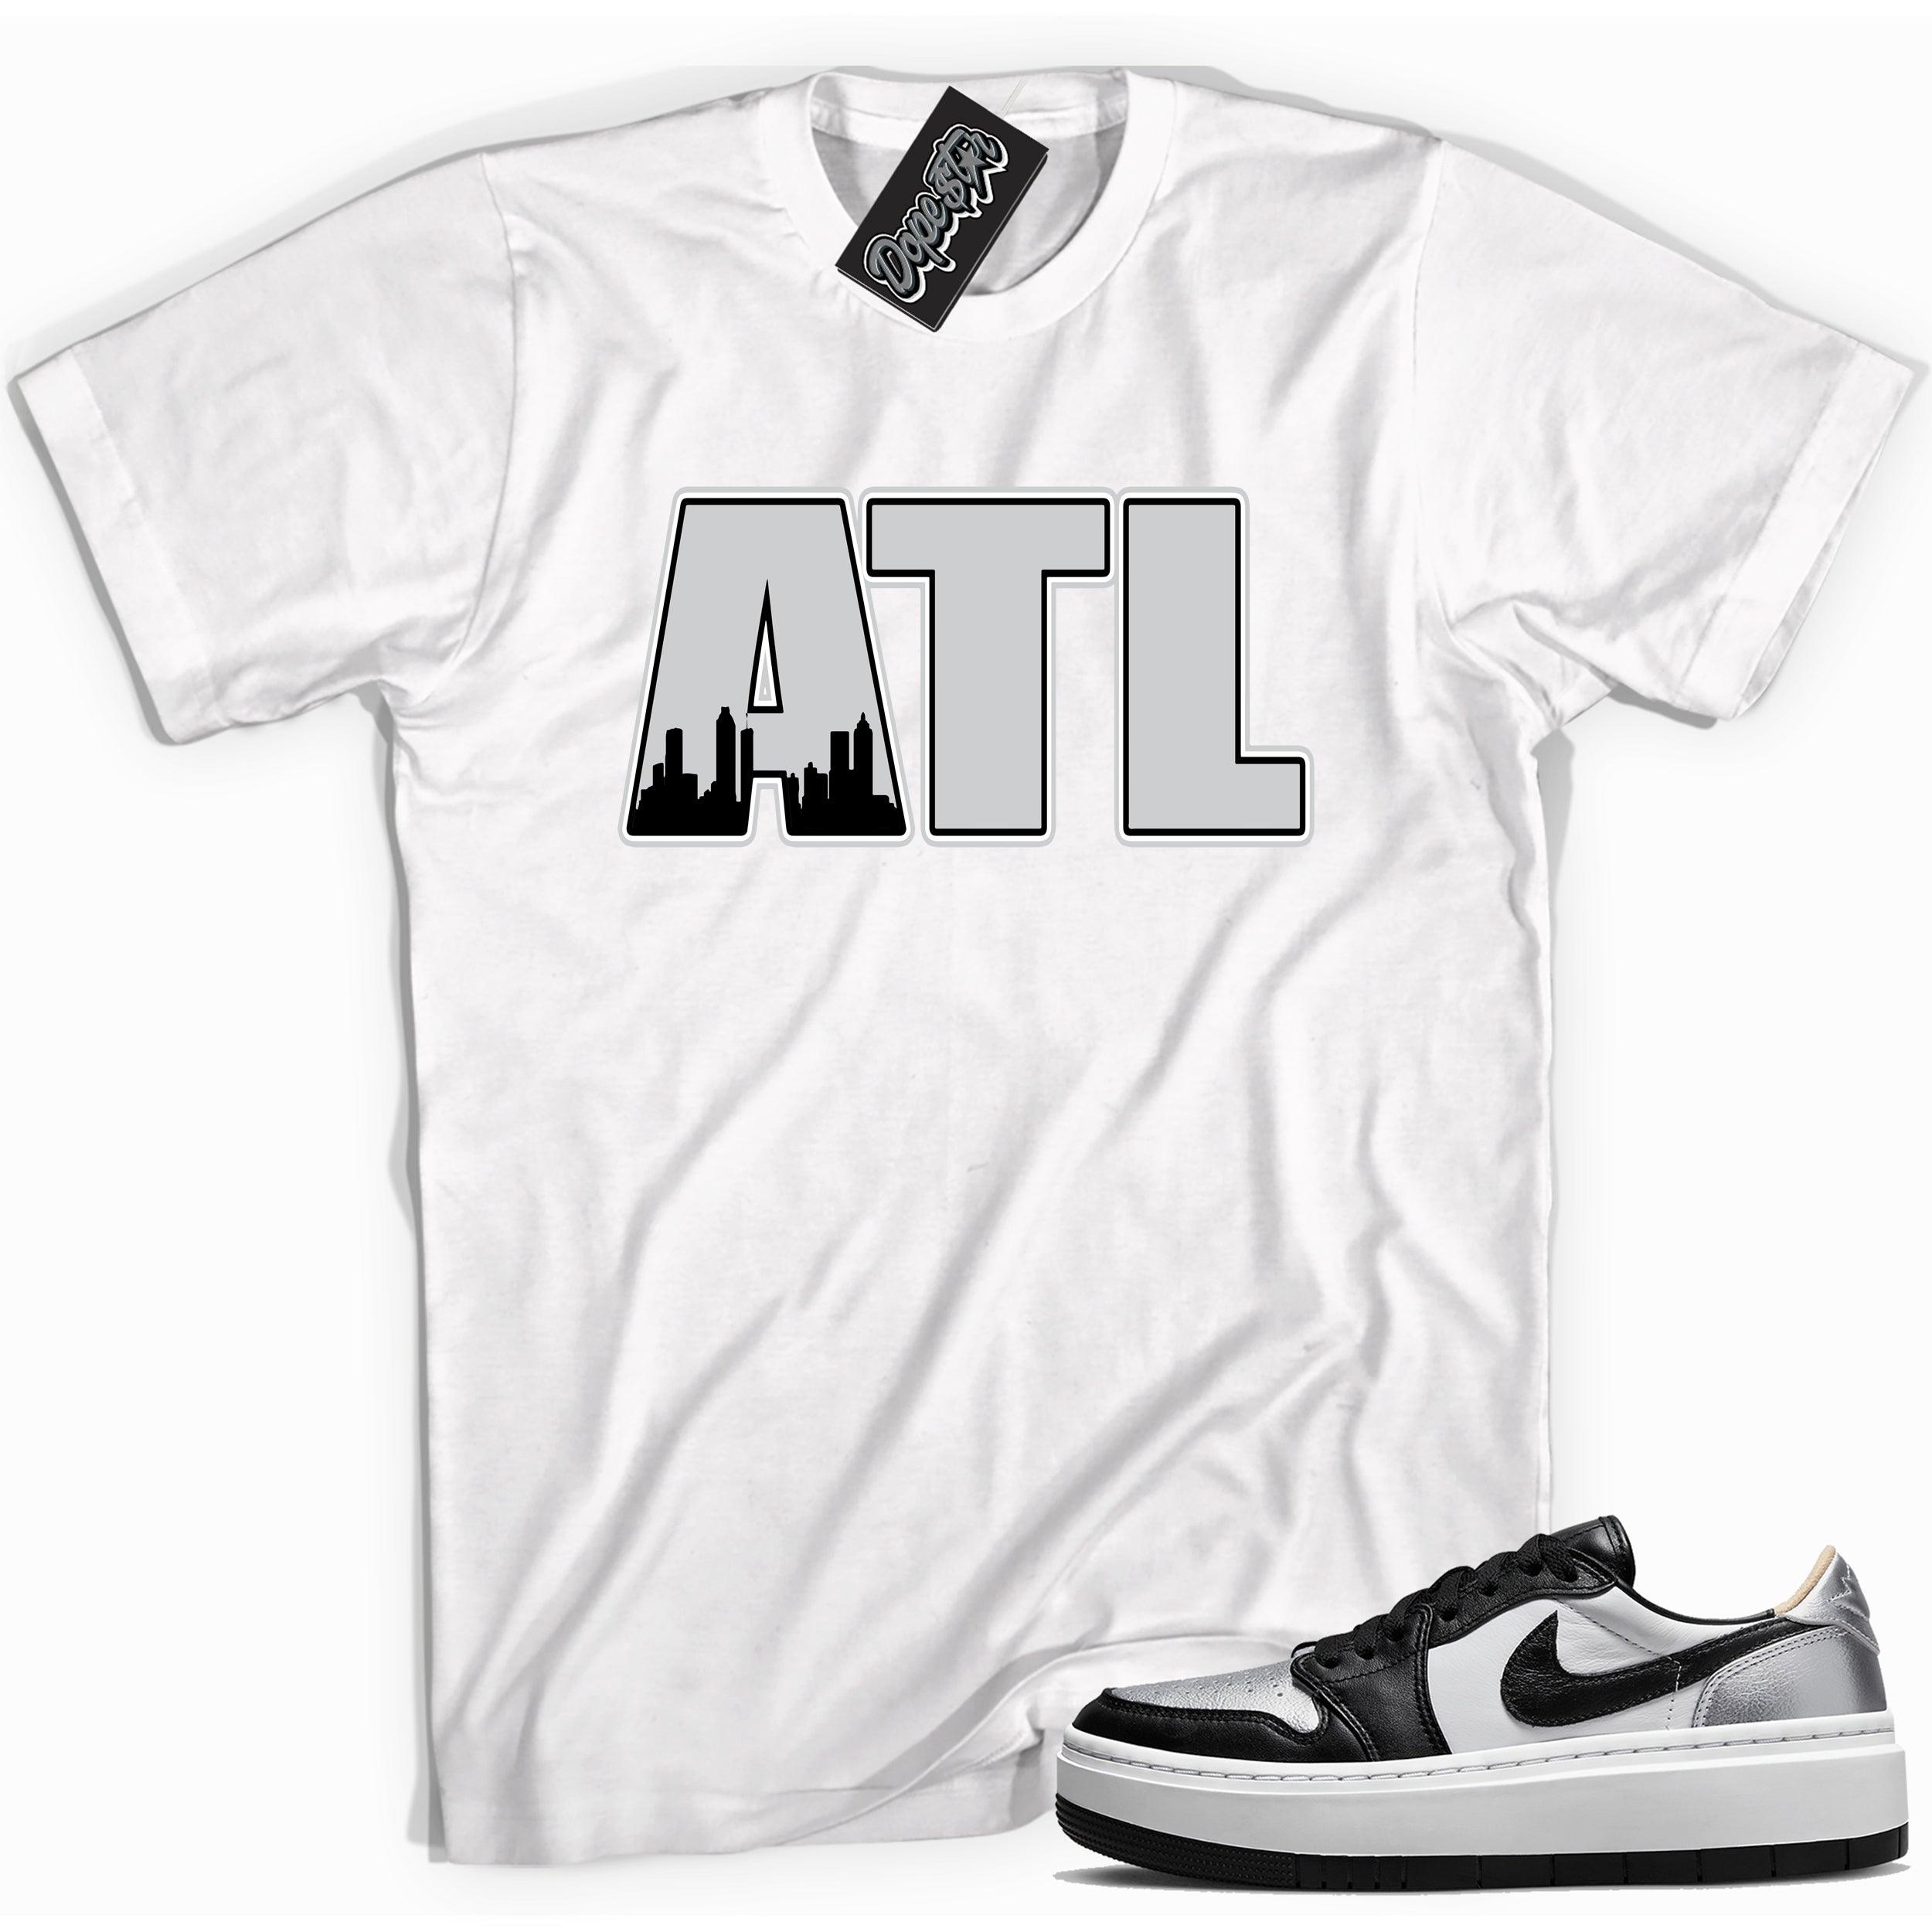 Cool white graphic tee with 'ATL Atlanta' print, that perfectly matches Air Jordan 1 Elevate Low SE Silver Toe sneakers.